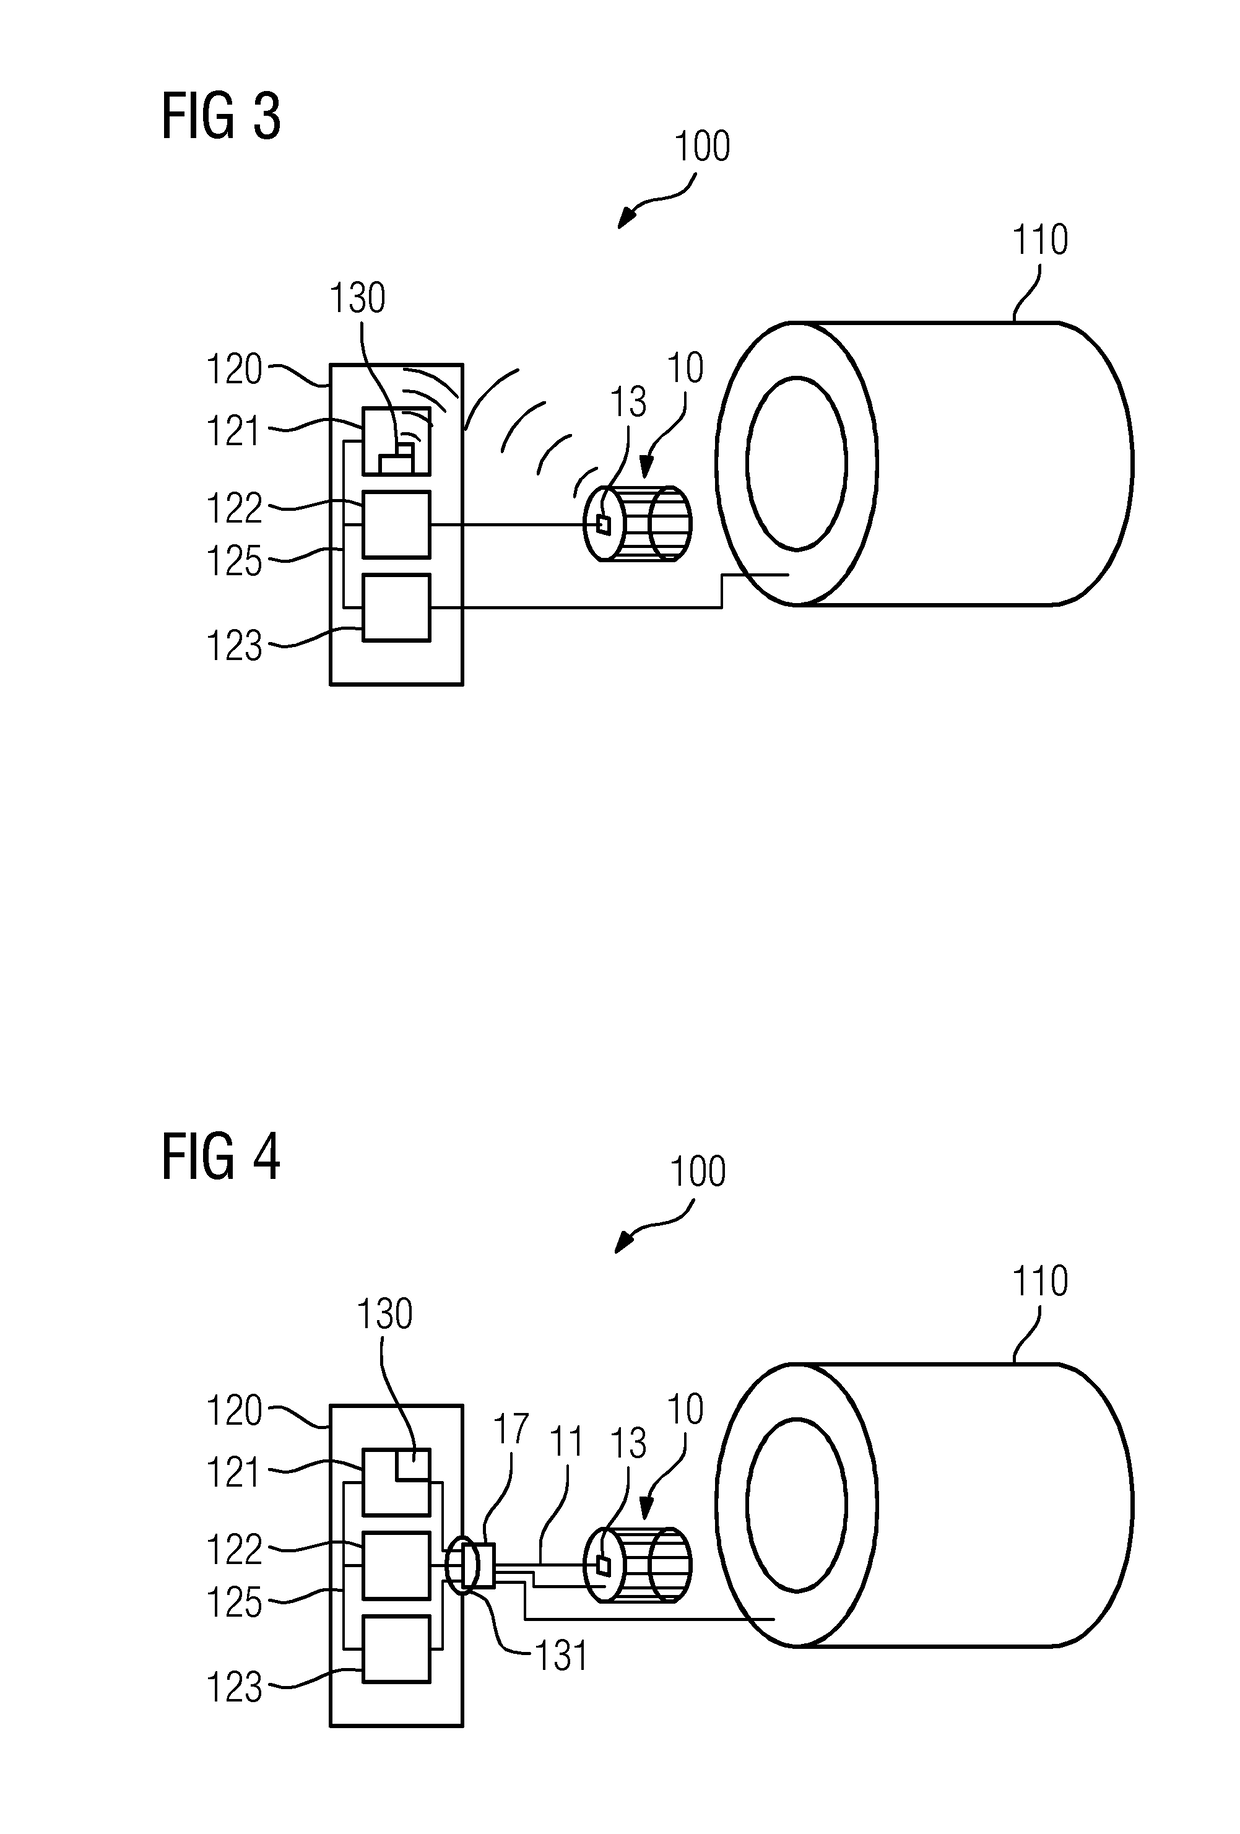 Local transmit coil with integrated safety device